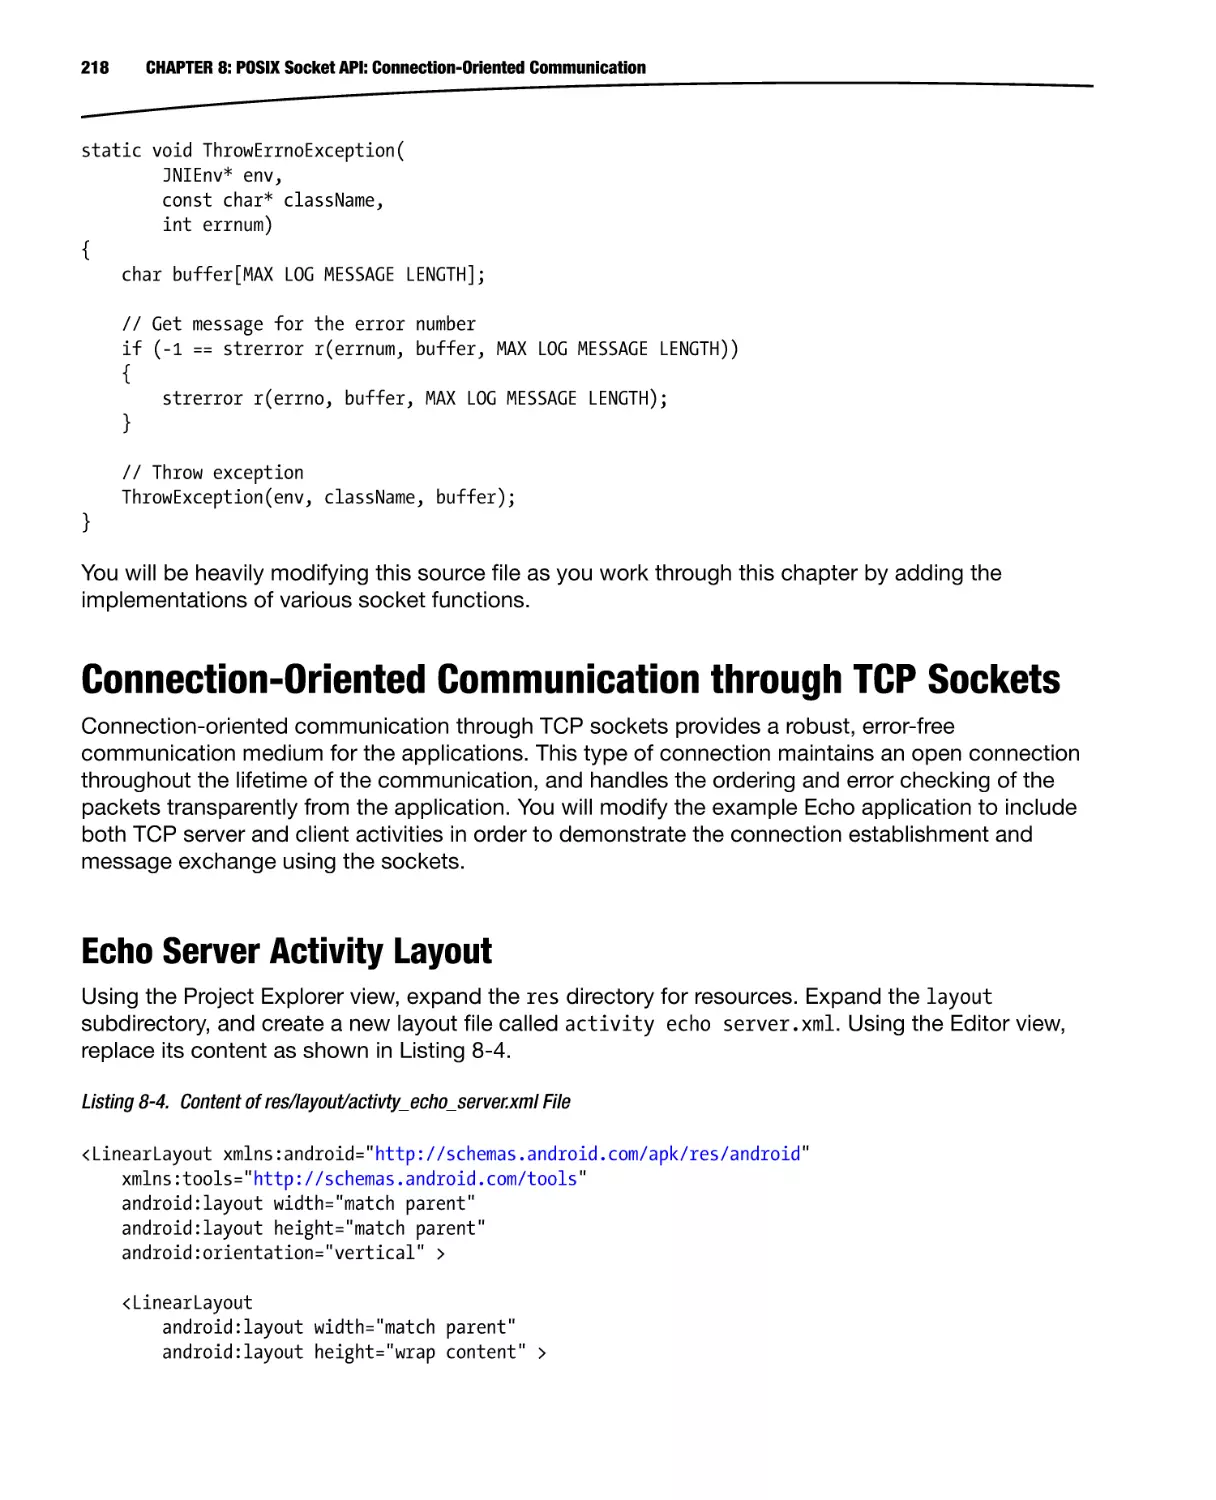 Connection-Oriented Communication through TCP Sockets
Echo Server Activity Layout